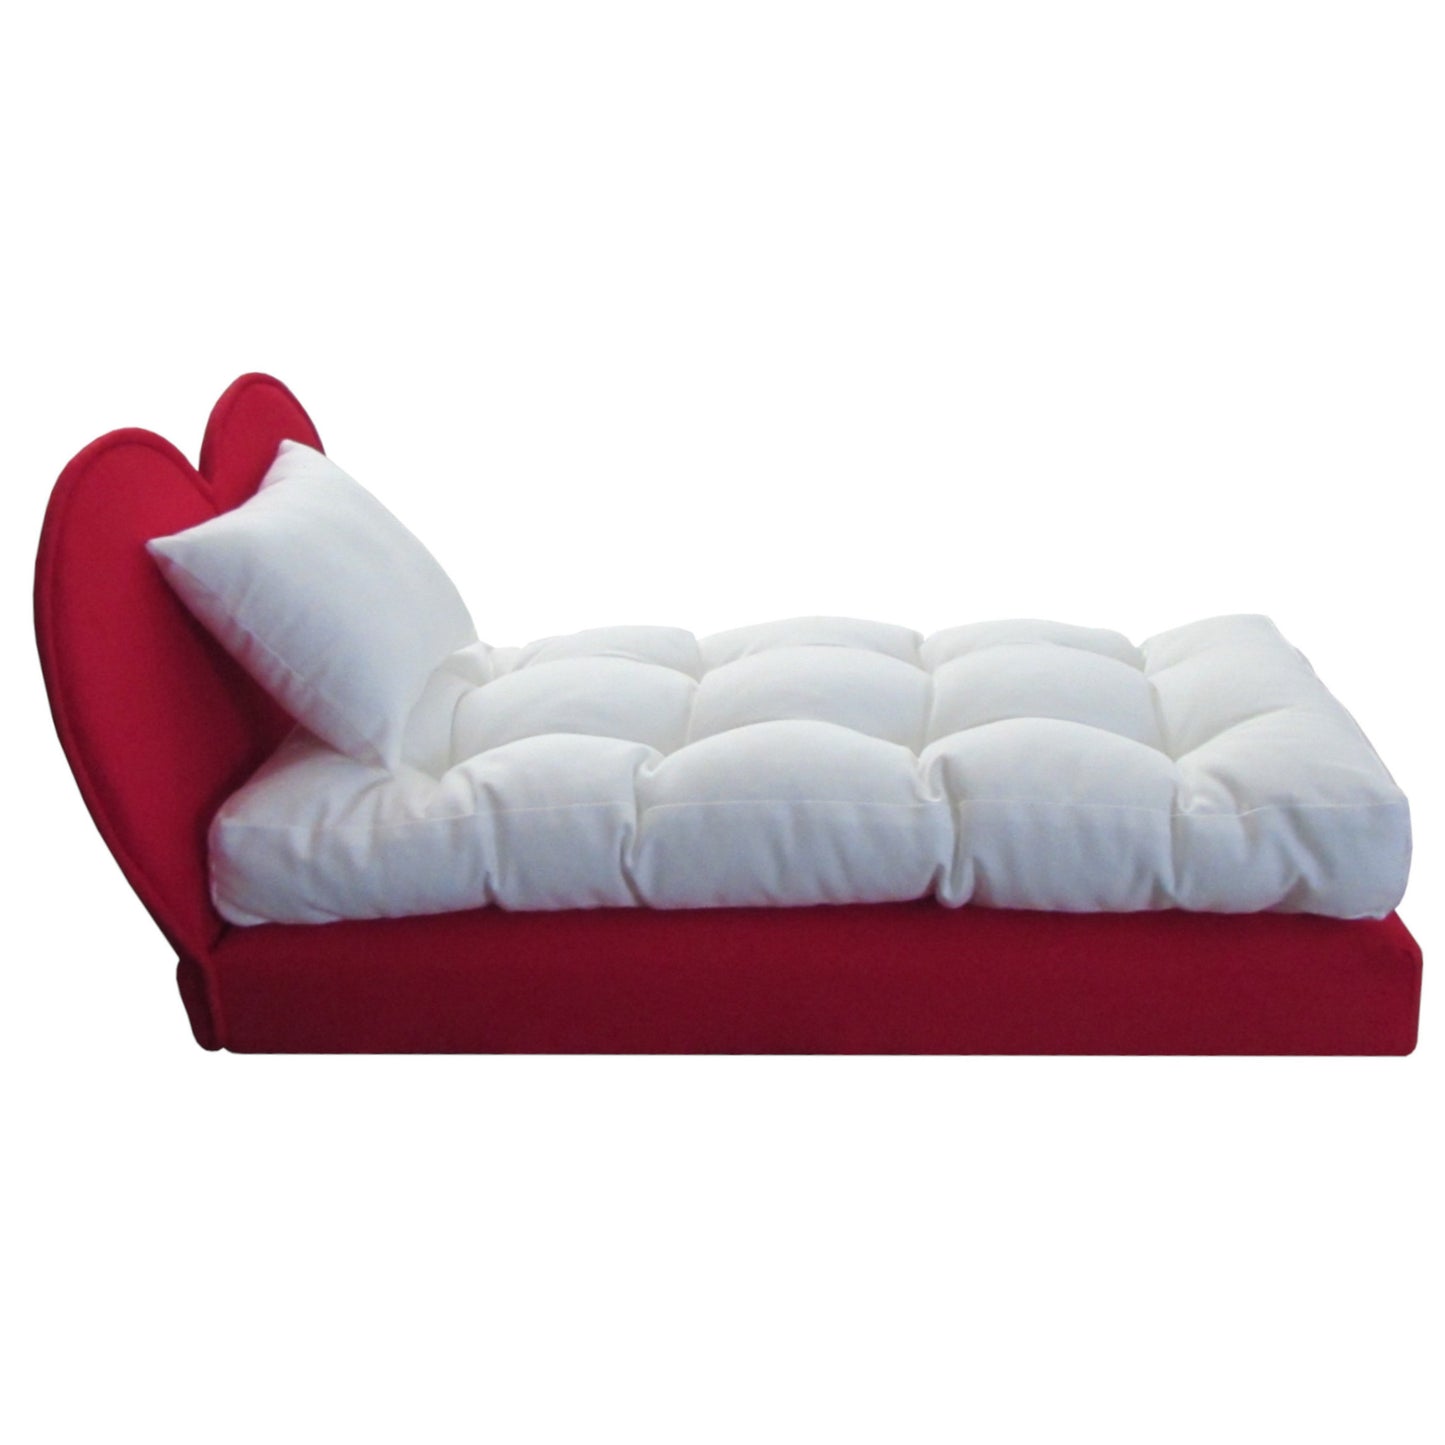 Upholstered Red Heart Doll Bed for 14.5-inch dolls